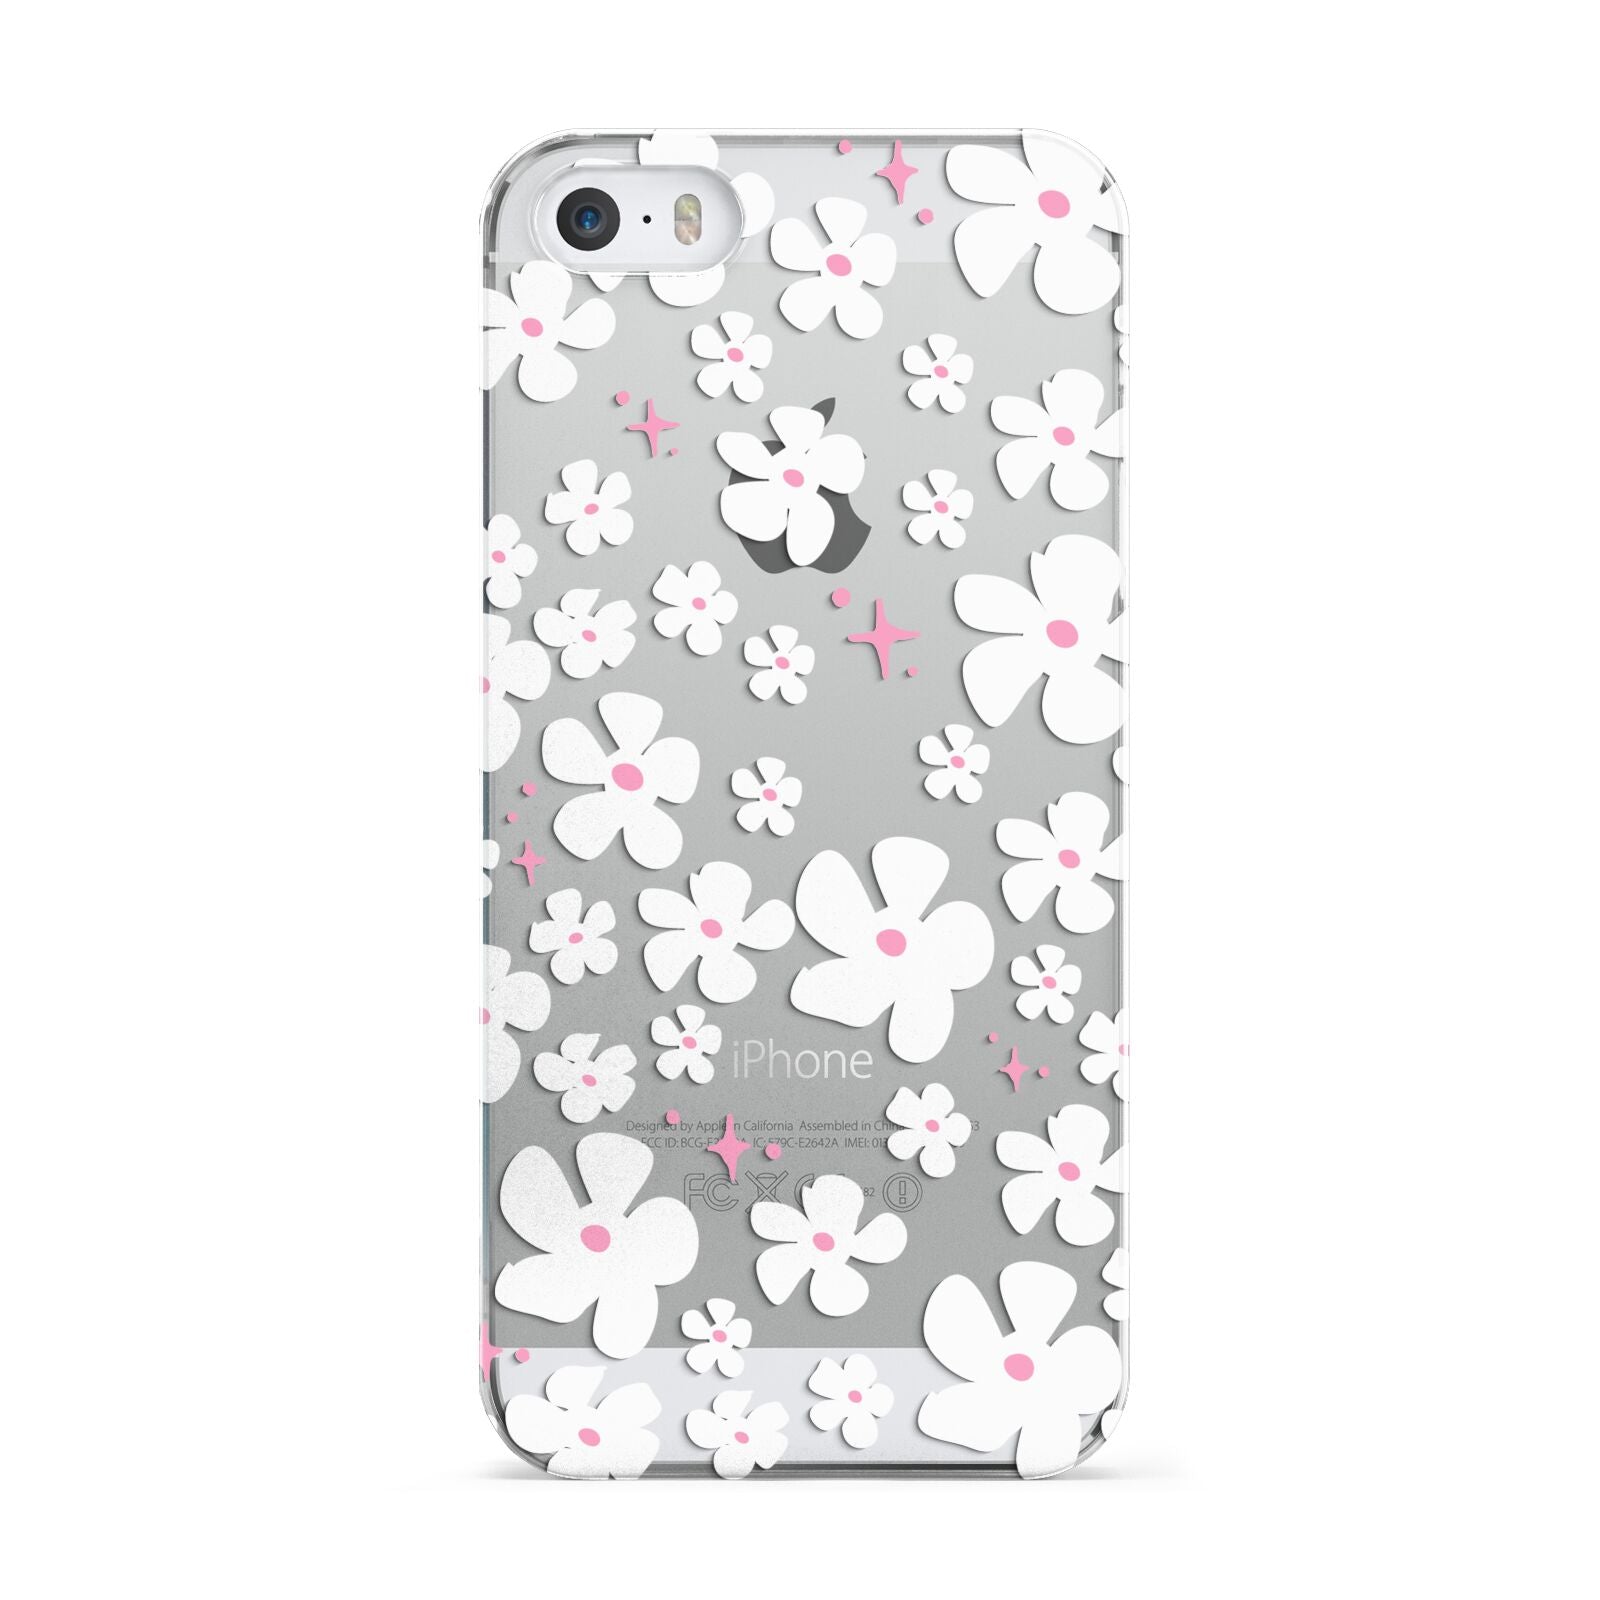 Abstract Daisy Apple iPhone 5 Case